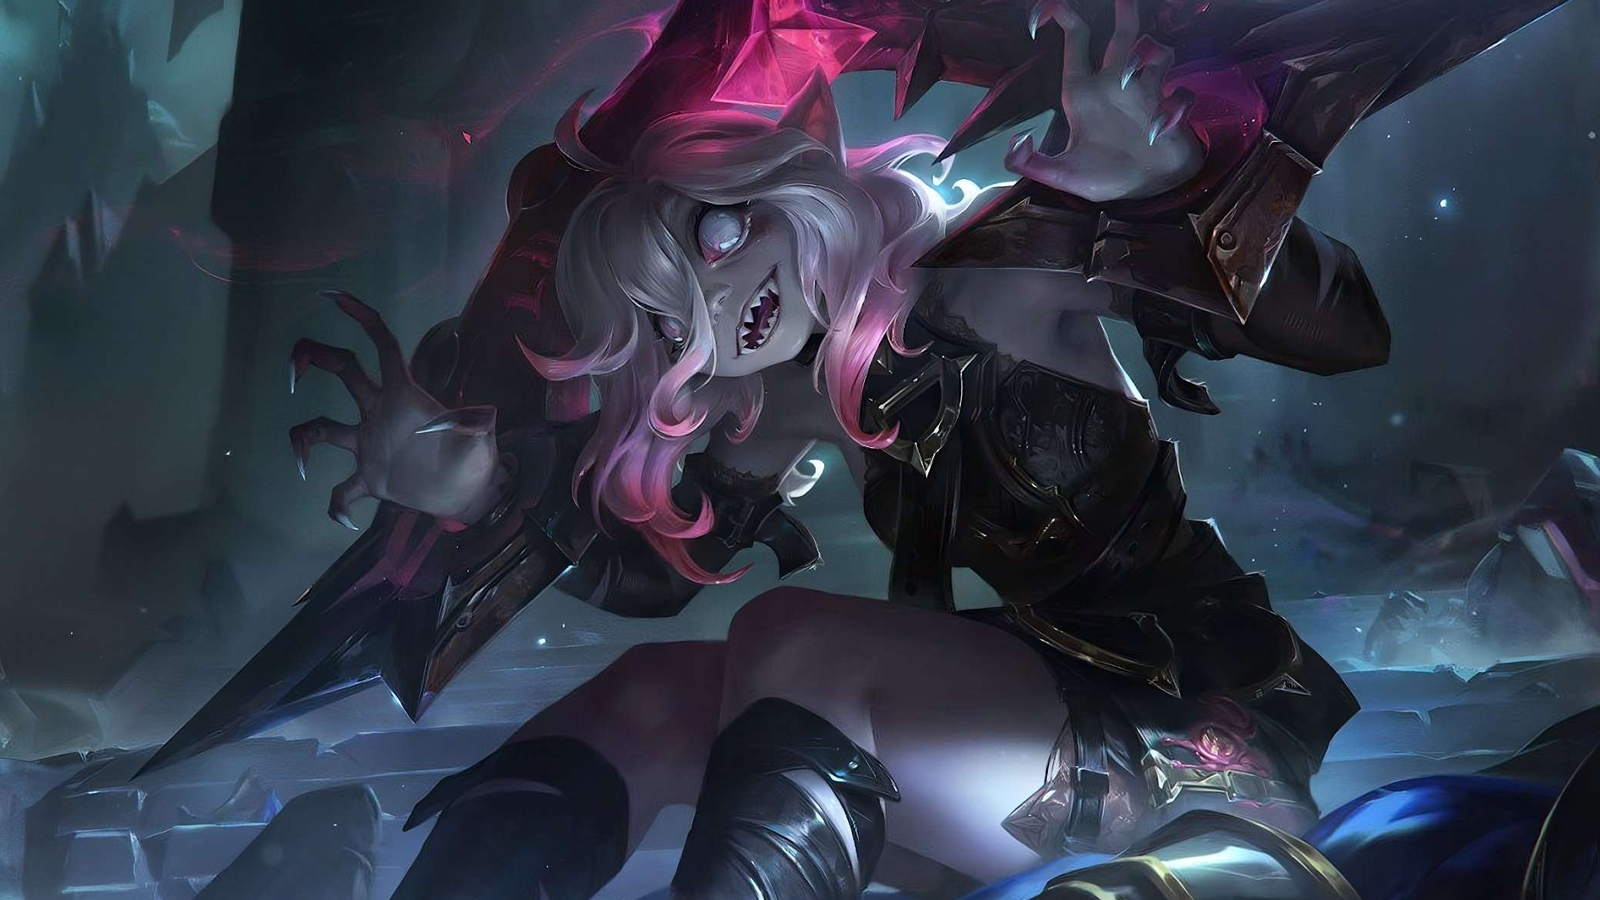 Briar's kit is so overloaded, she'll probably break League of Legends